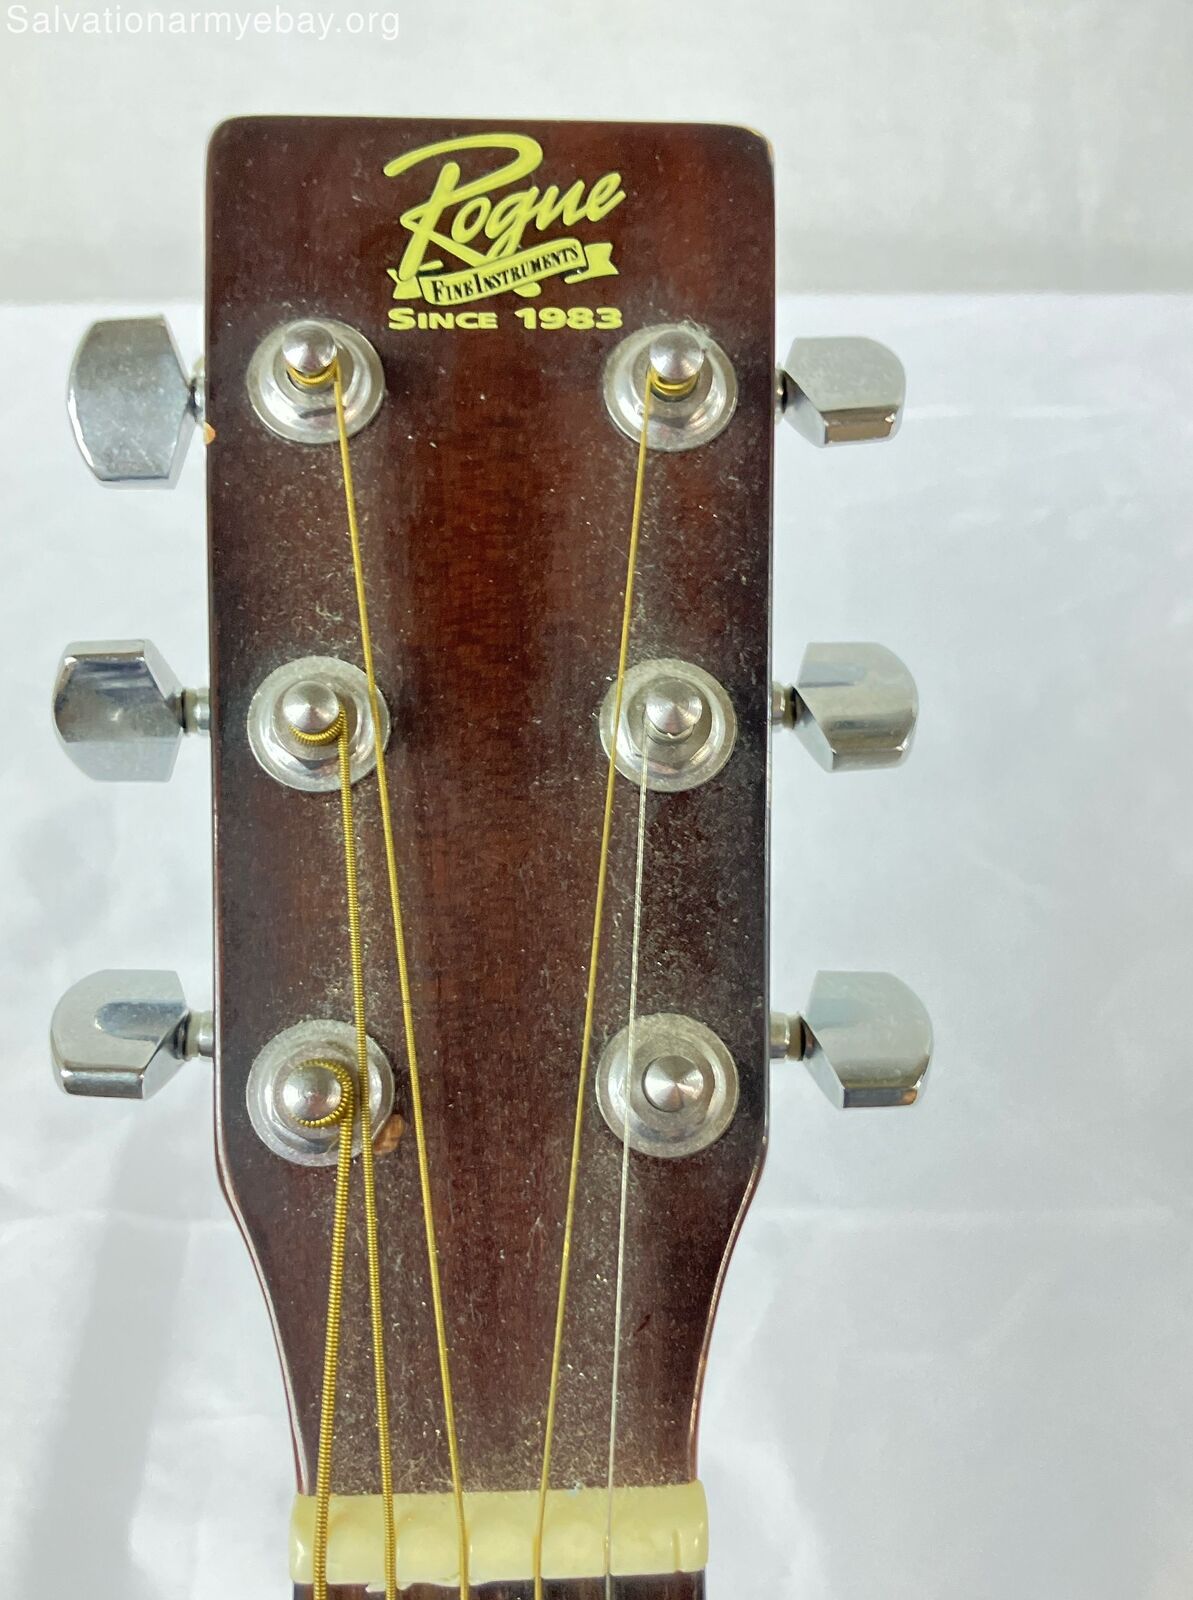 Rogue RA100D Acoustic Guitar [Needs New Strings] [Has Slight Chips on Body] 4